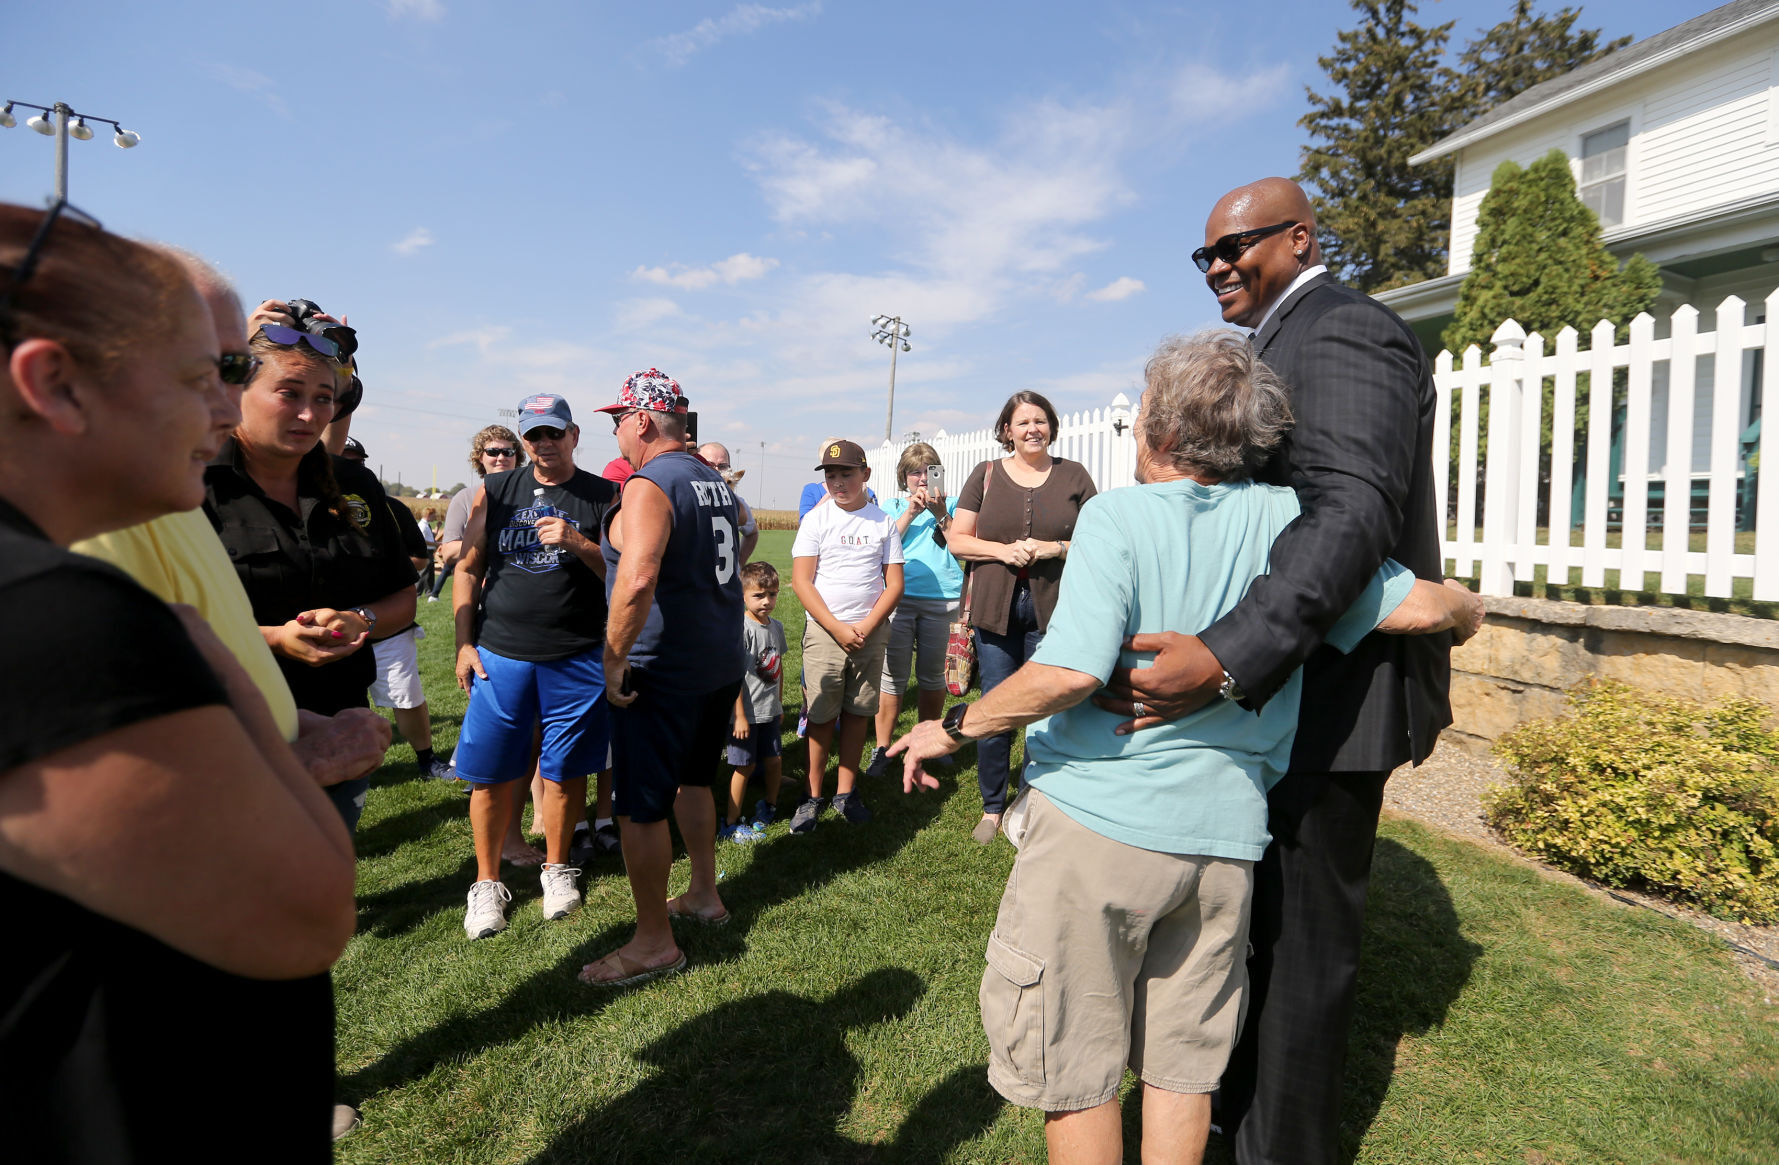 Baseball Hall of Famer Frank Thomas, who will serve as the CEO of Go the Distance Baseball, greets people after a press conference at the Field of Dreams in Dyersville, Iowa, on Thursday, Sept. 30, 2021.    PHOTO CREDIT: JESSICA REILLY